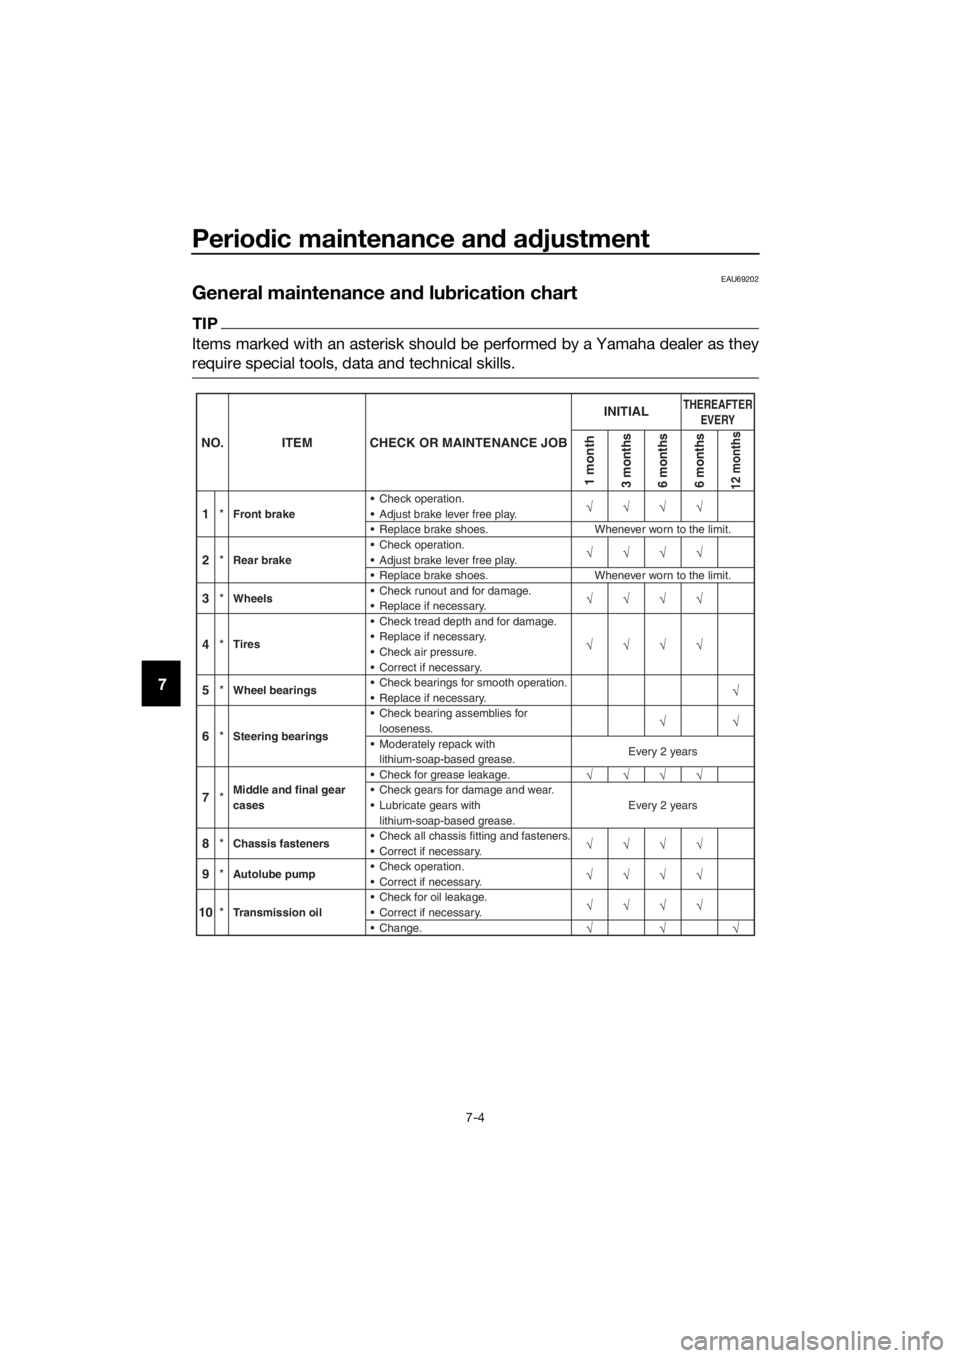 YAMAHA PW50 2019  Owners Manual Periodic maintenance an d a djustment
7-4
7
EAU69202
General maintenance and  lubrication chart
TIP
Items marked with an asterisk should be performed by a Yamaha dealer as they
require special tools, 